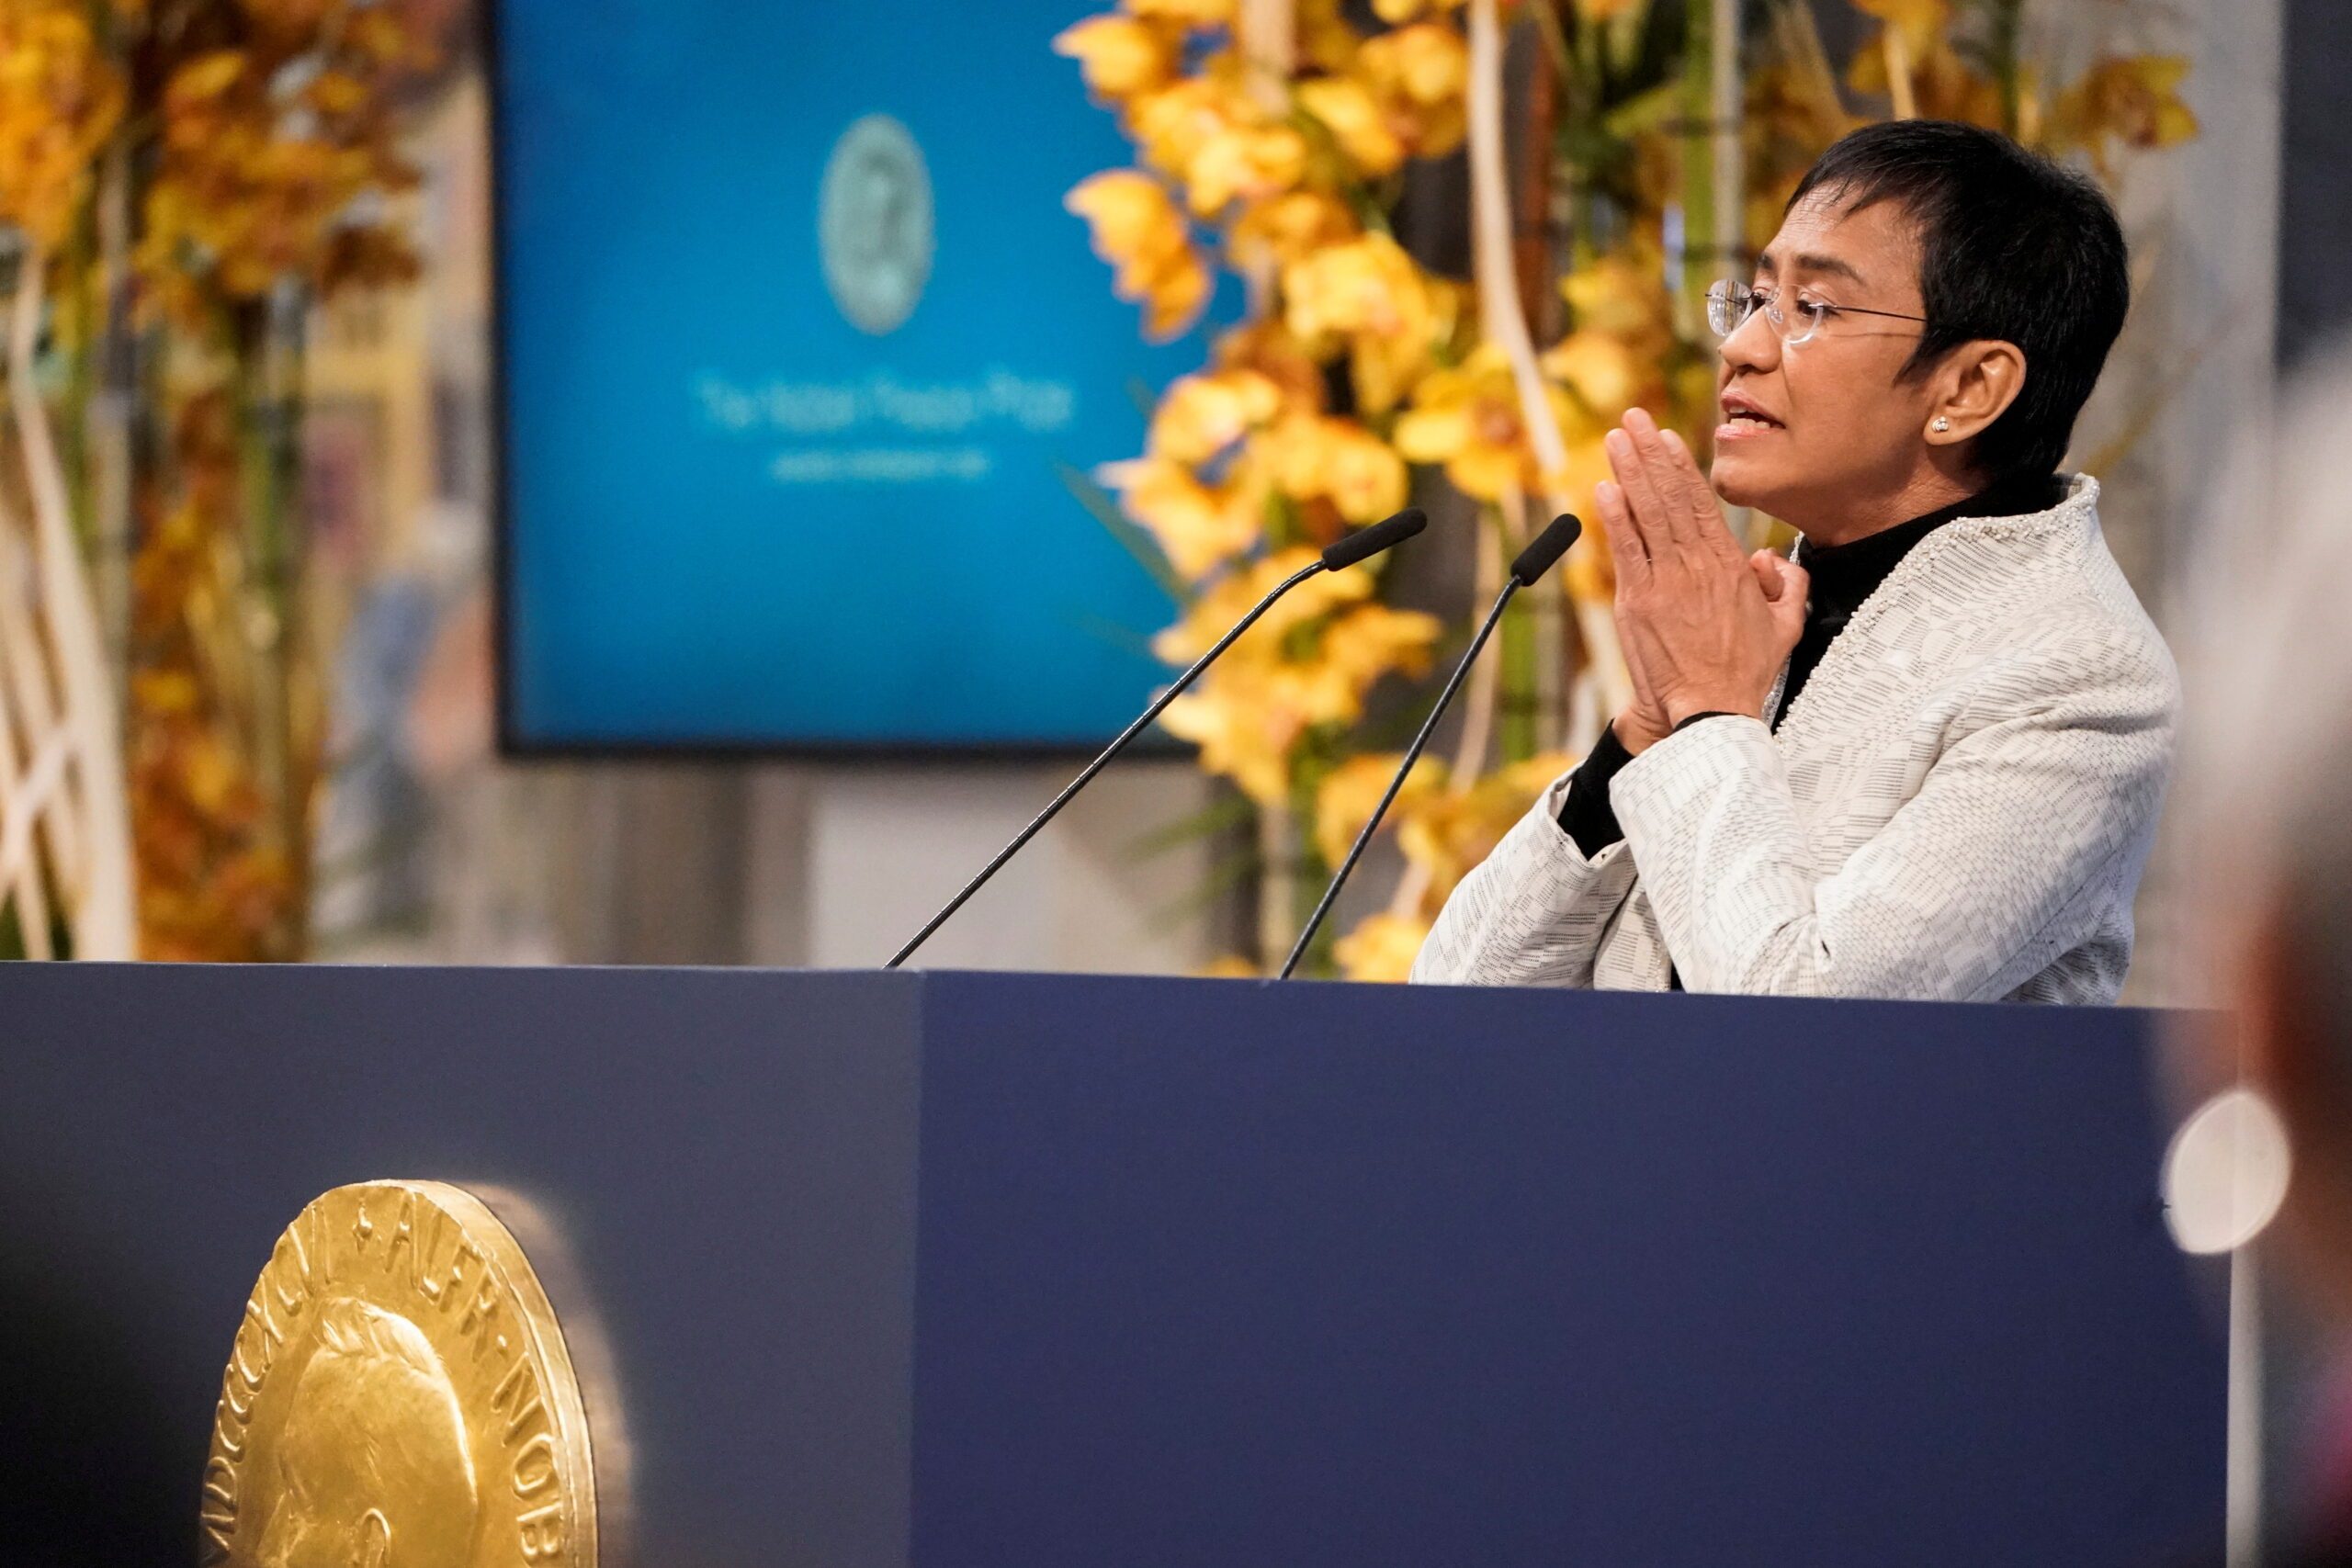 Rappler’s Maria Ressa makes history, receives Nobel Peace Prize in Oslo